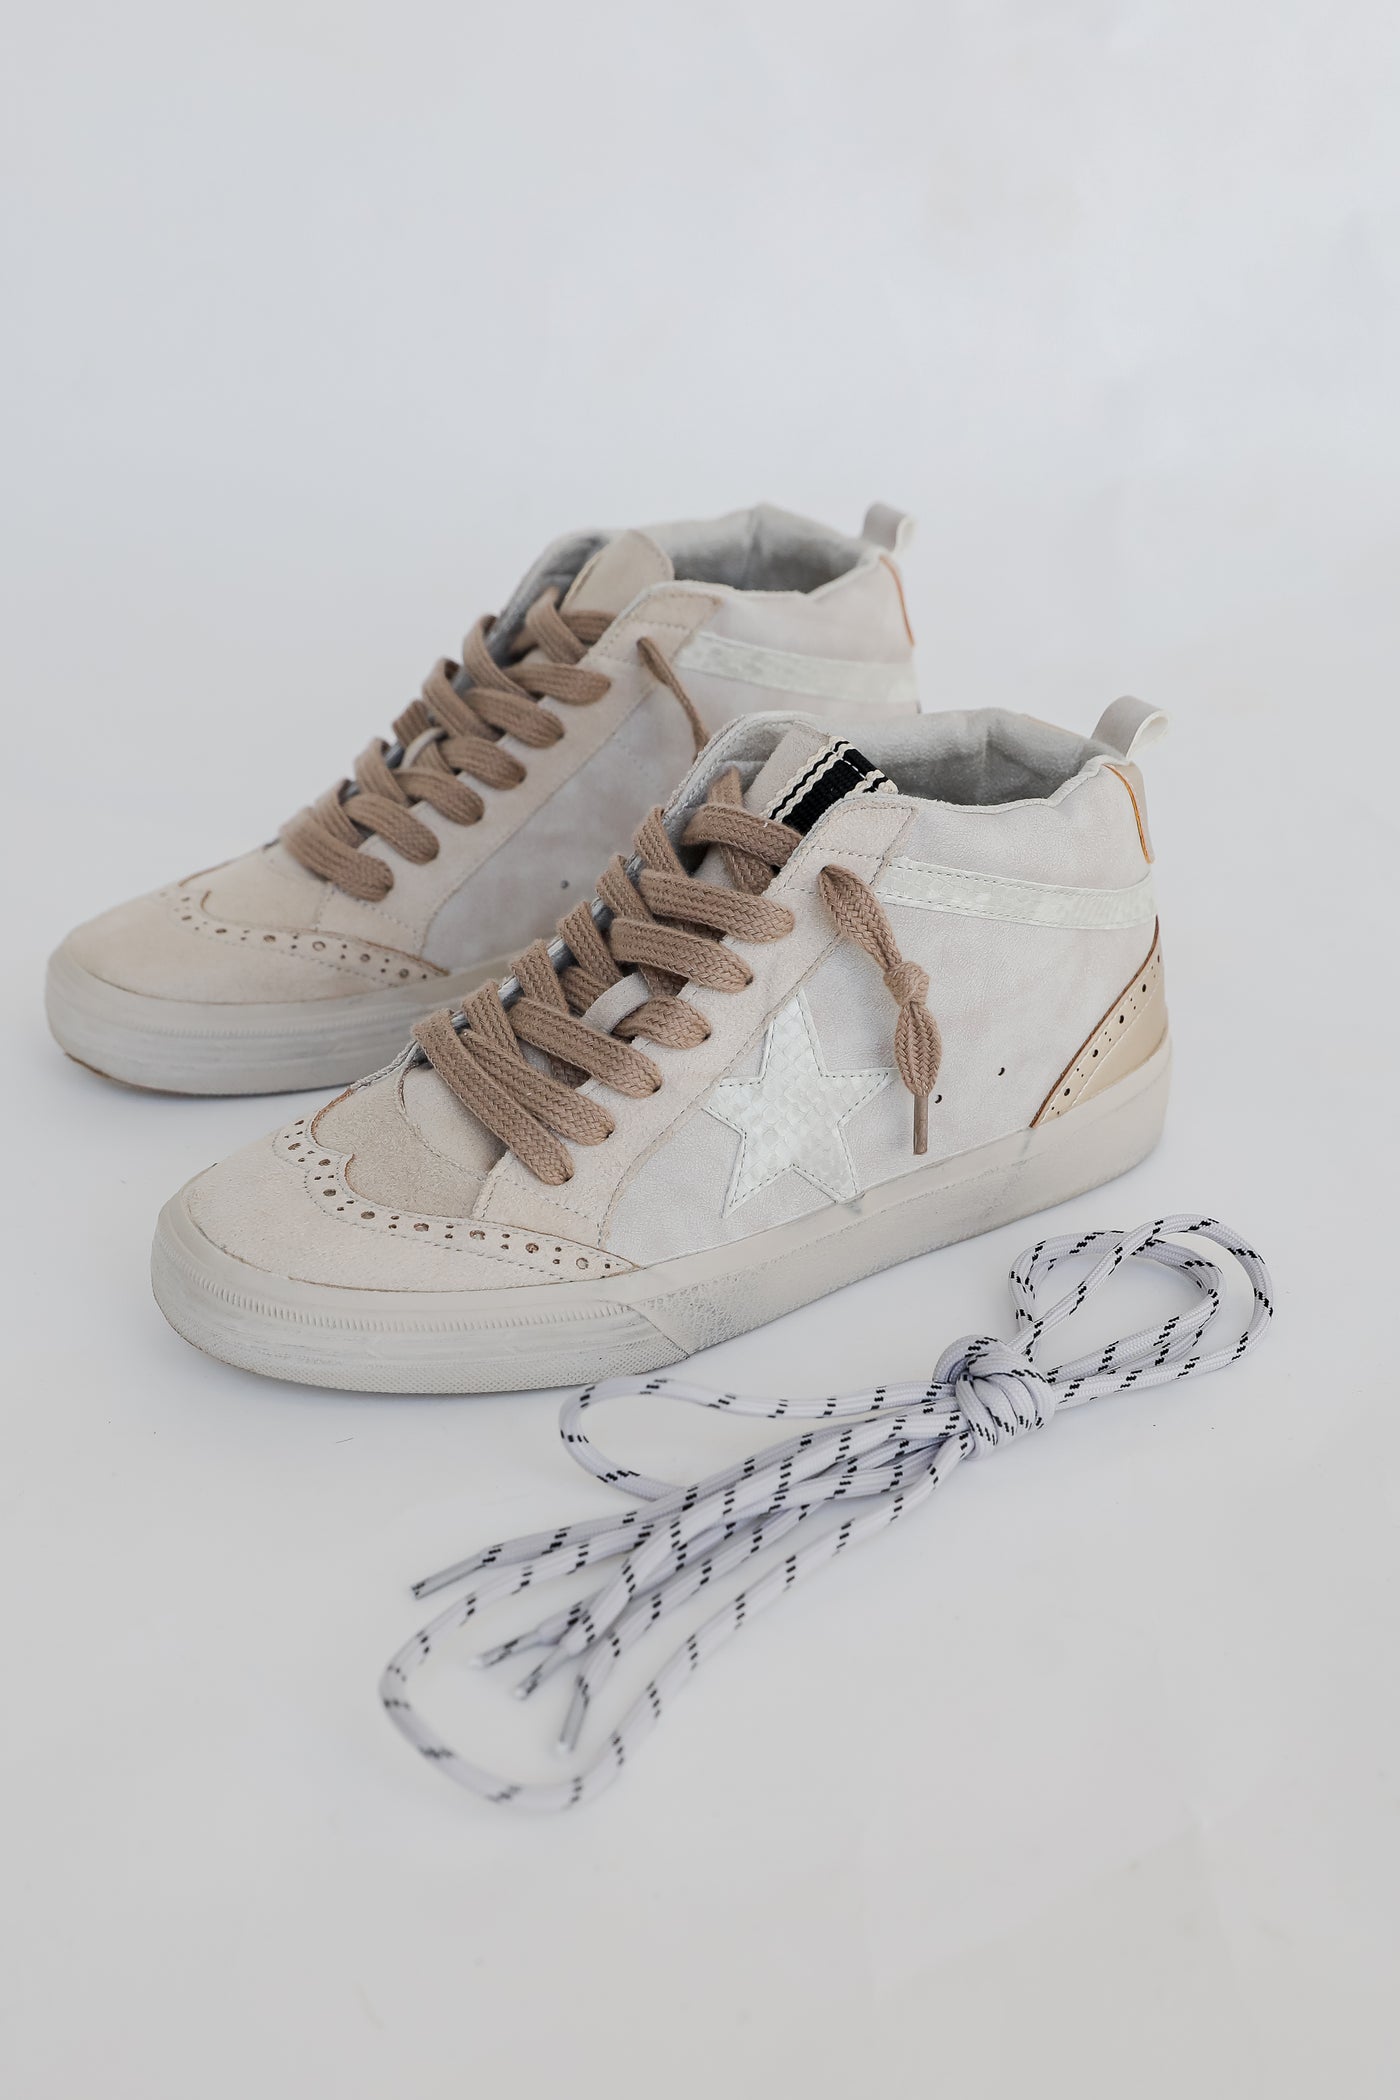 High Top Star Sneakers flat lay